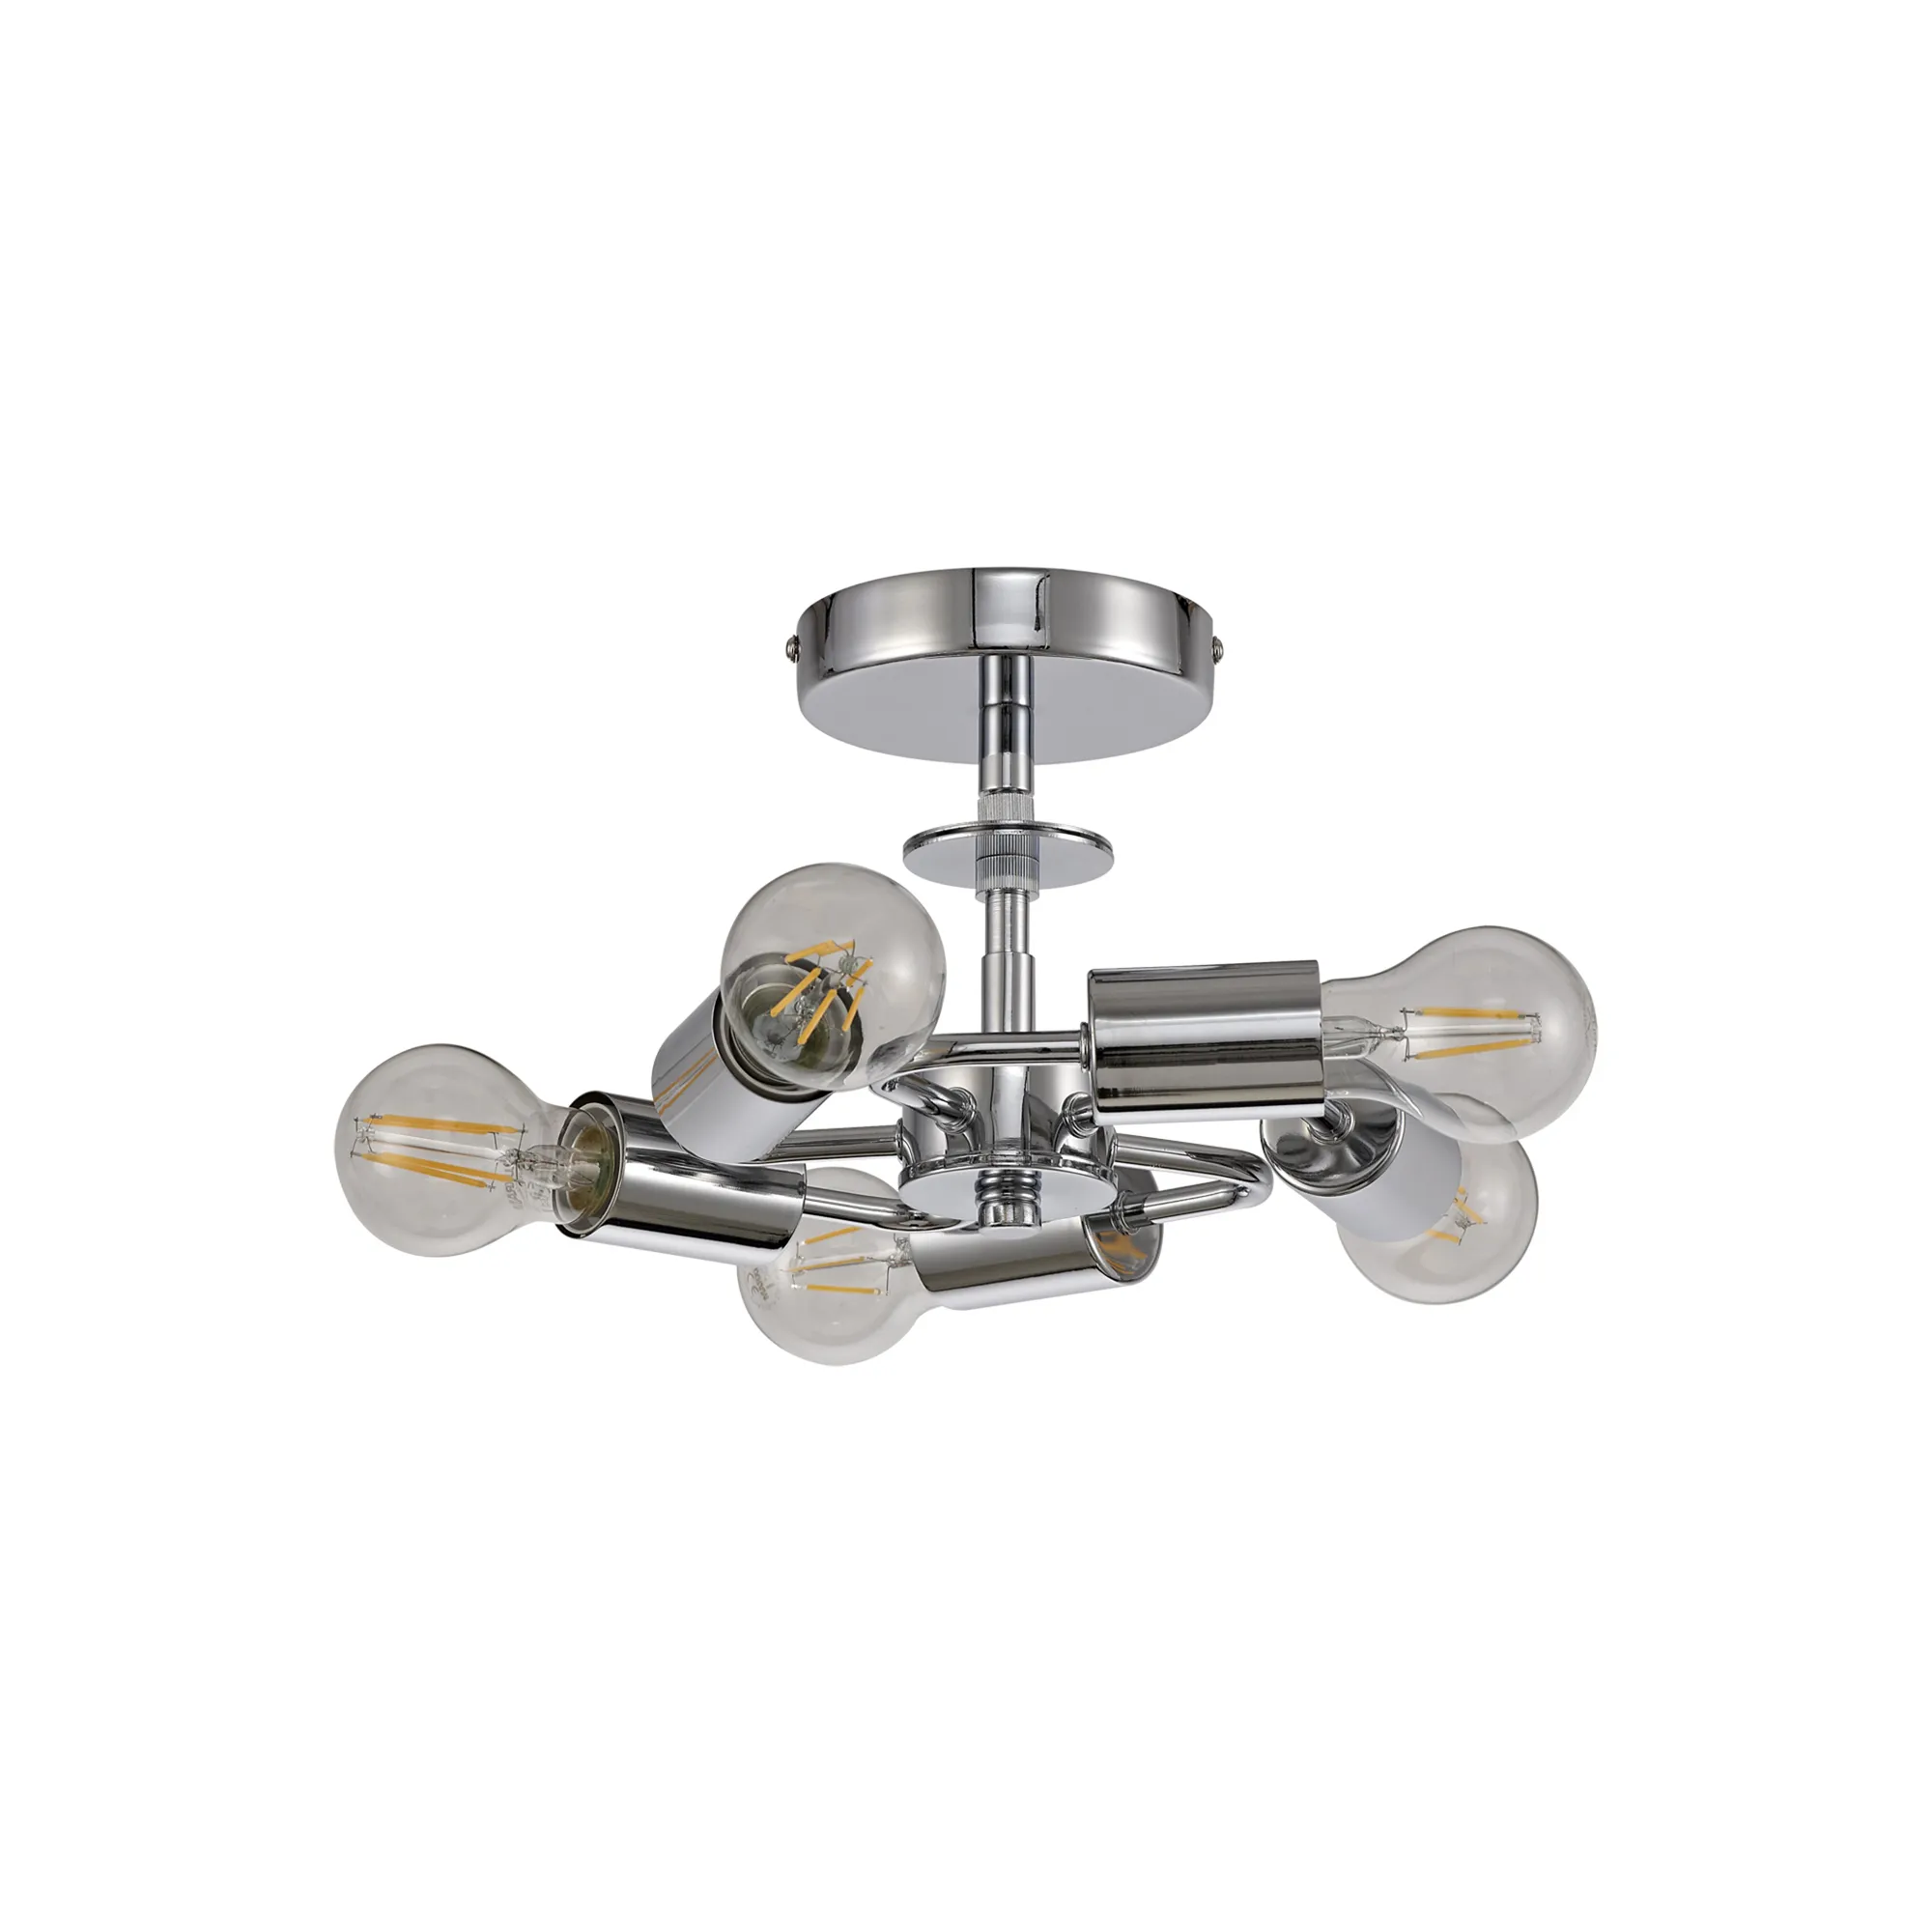 Baymont 60cm, Drop Flush 5 Light Polished Chrome, Raw Cocoa/Grecian Bronze, Frosted Diffuser DK0492  Deco Baymont CH RC